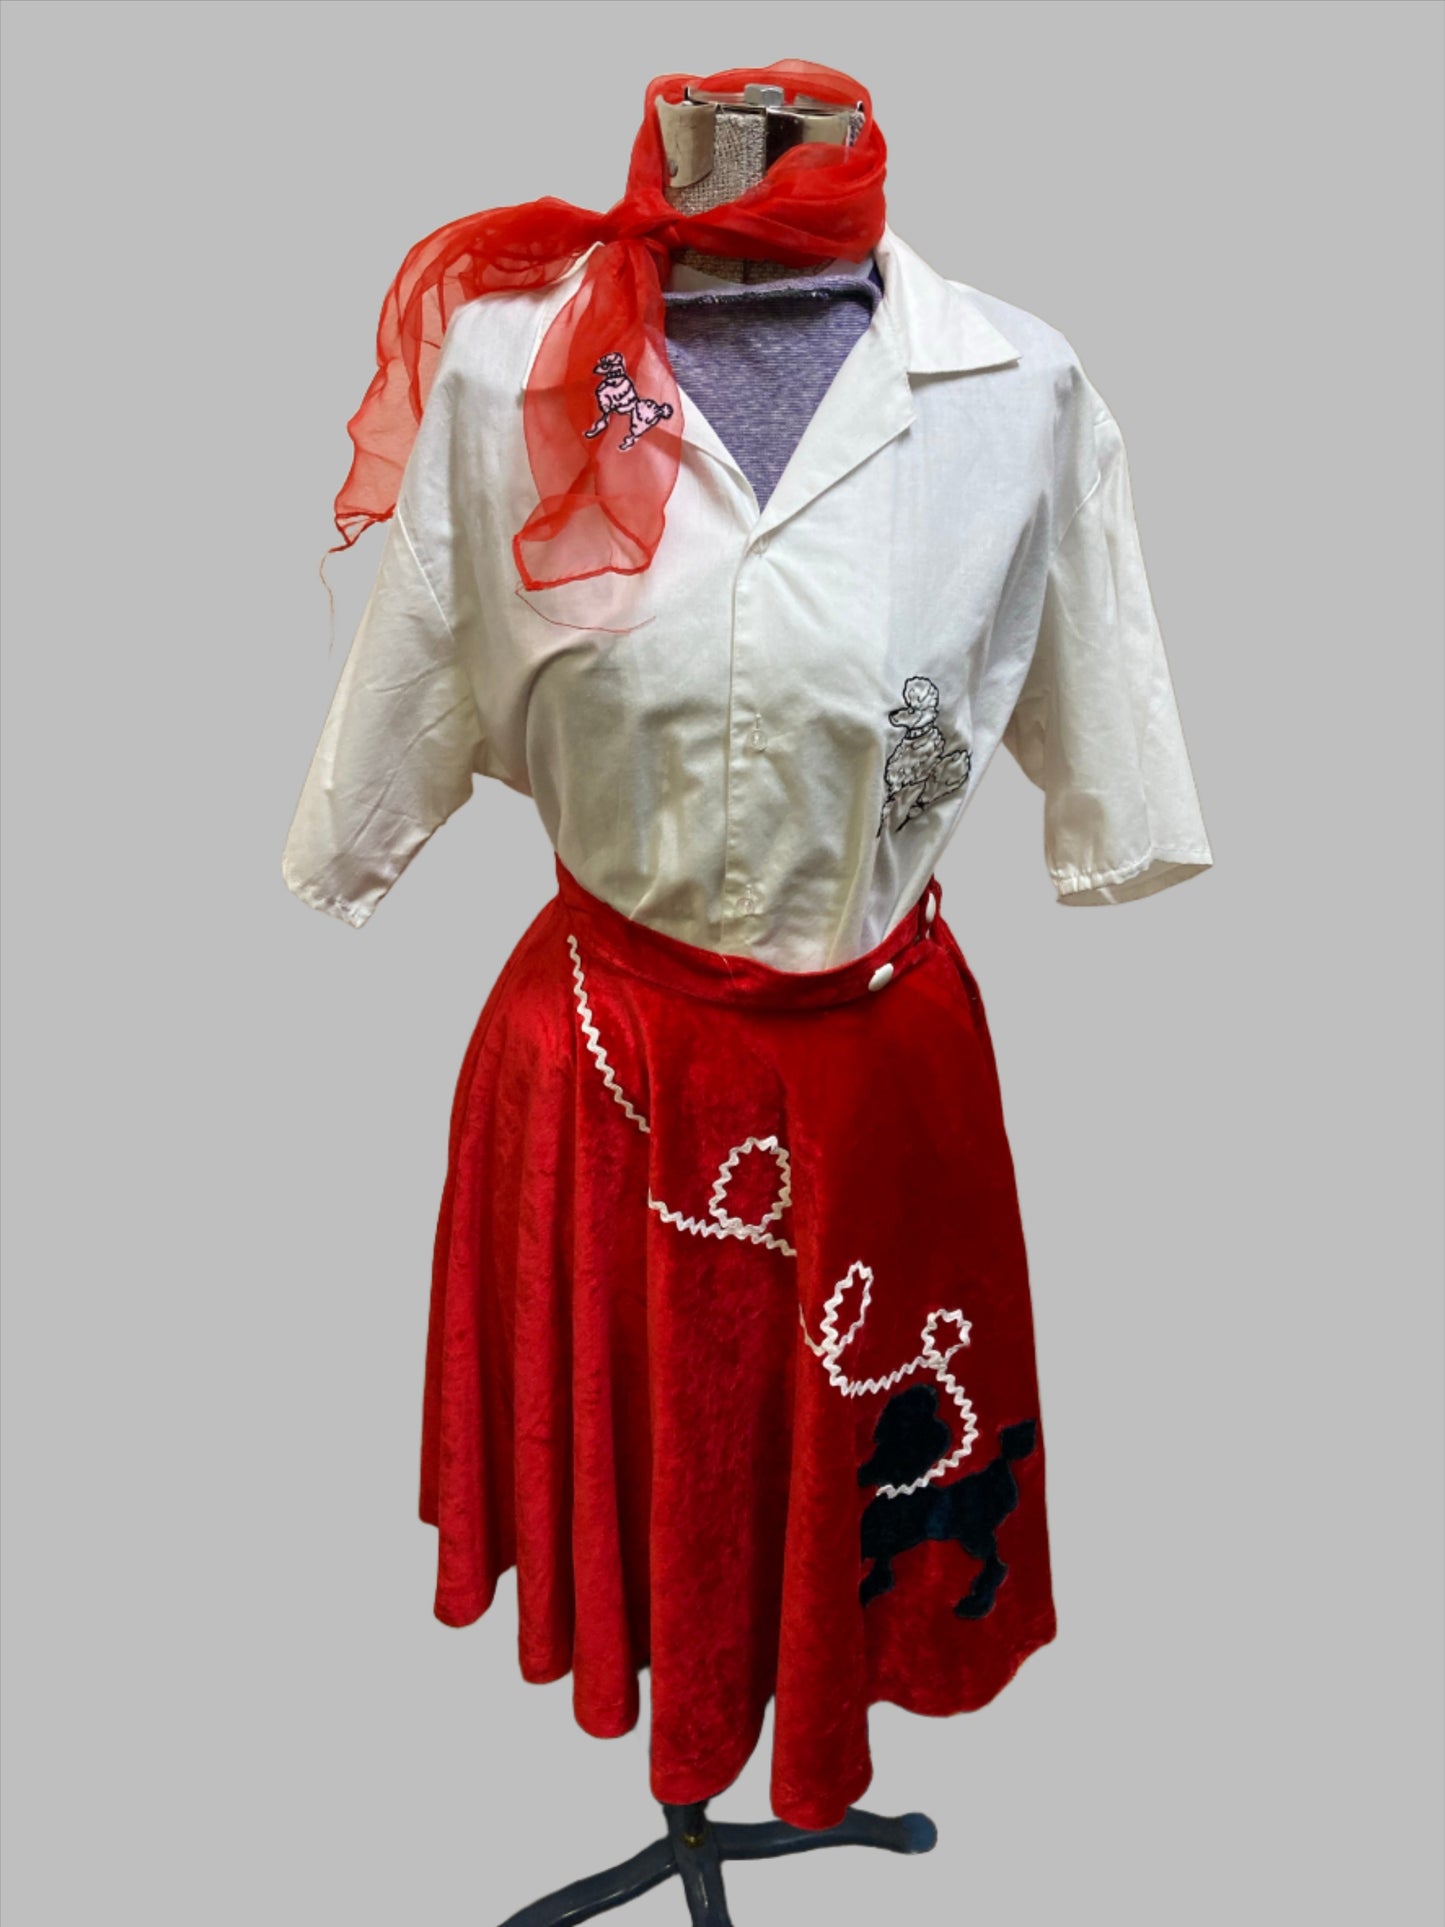 1950's Fifties Poodle Skirts & Outfits - Preowned